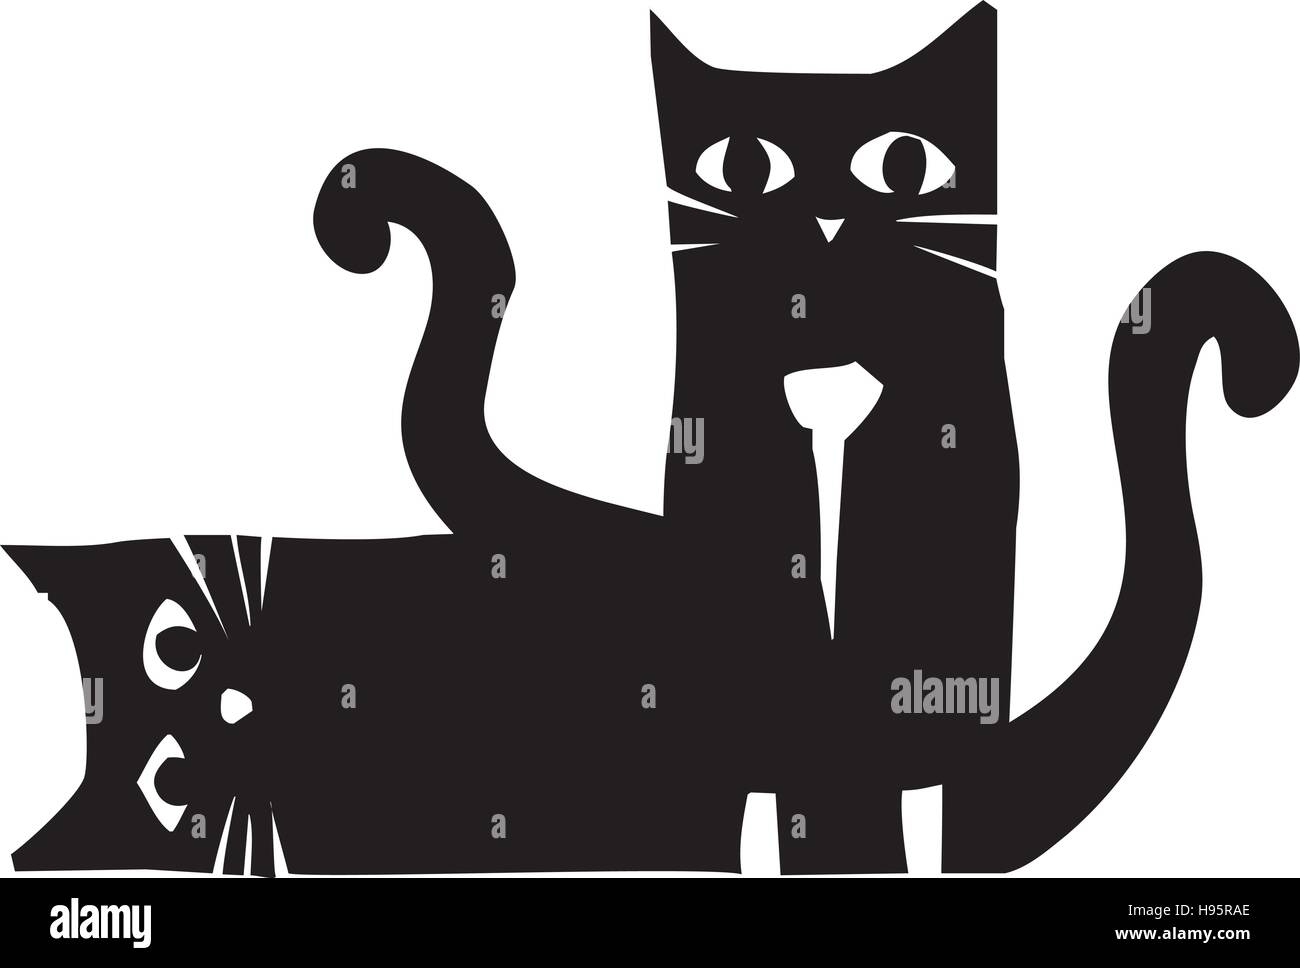 Two Cute Black Cats And Bird Stock Illustration - Download Image